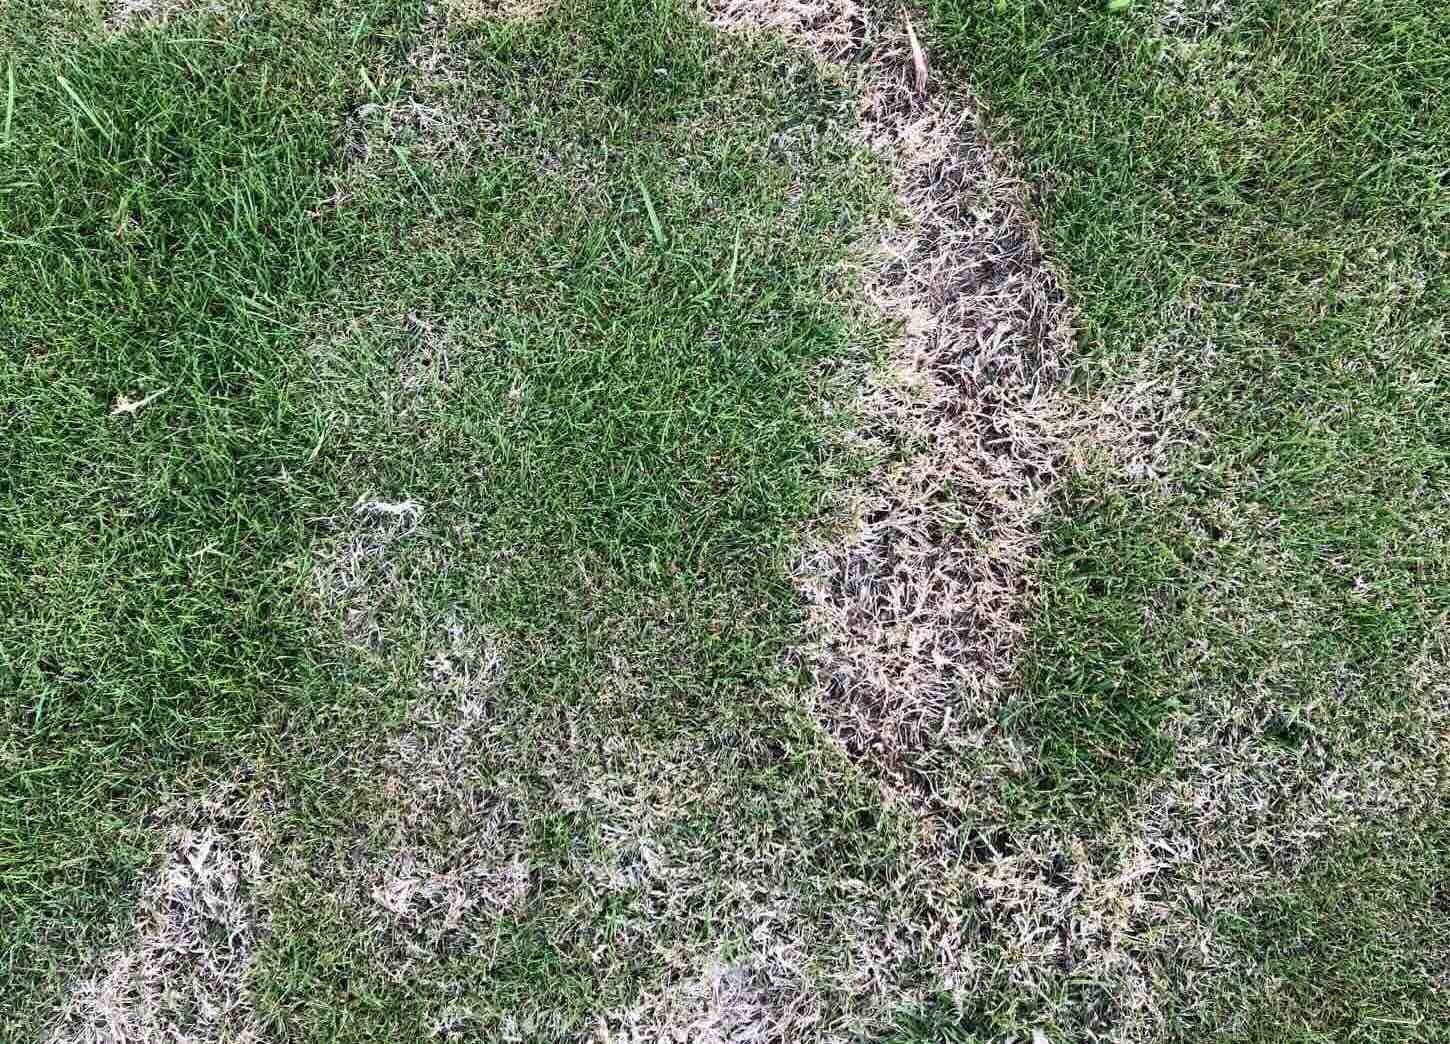 What Causes Grass To Die In Patches